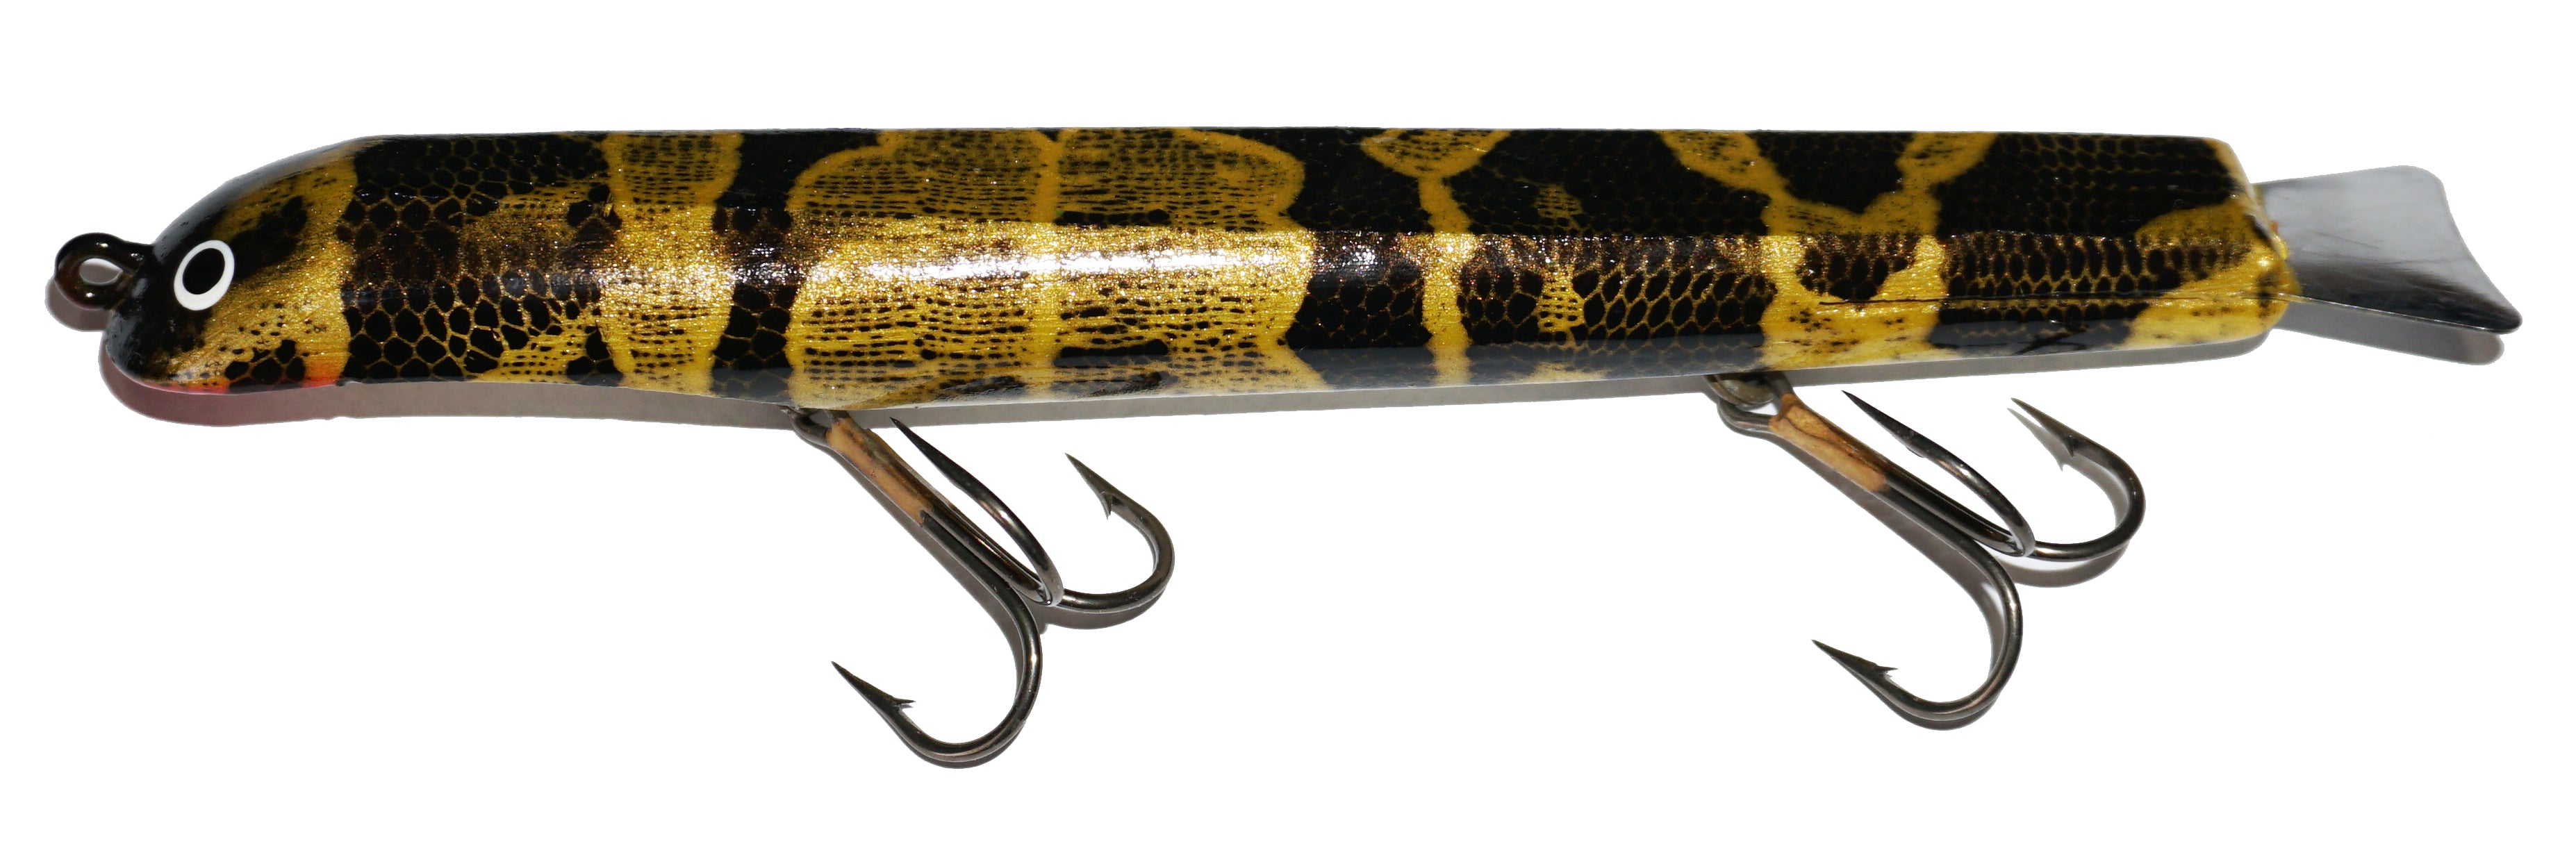 BHtackle 3 New 7 inch Musky Muskie Lures Crankbait Rattle Catfish Northern Pike Yellow